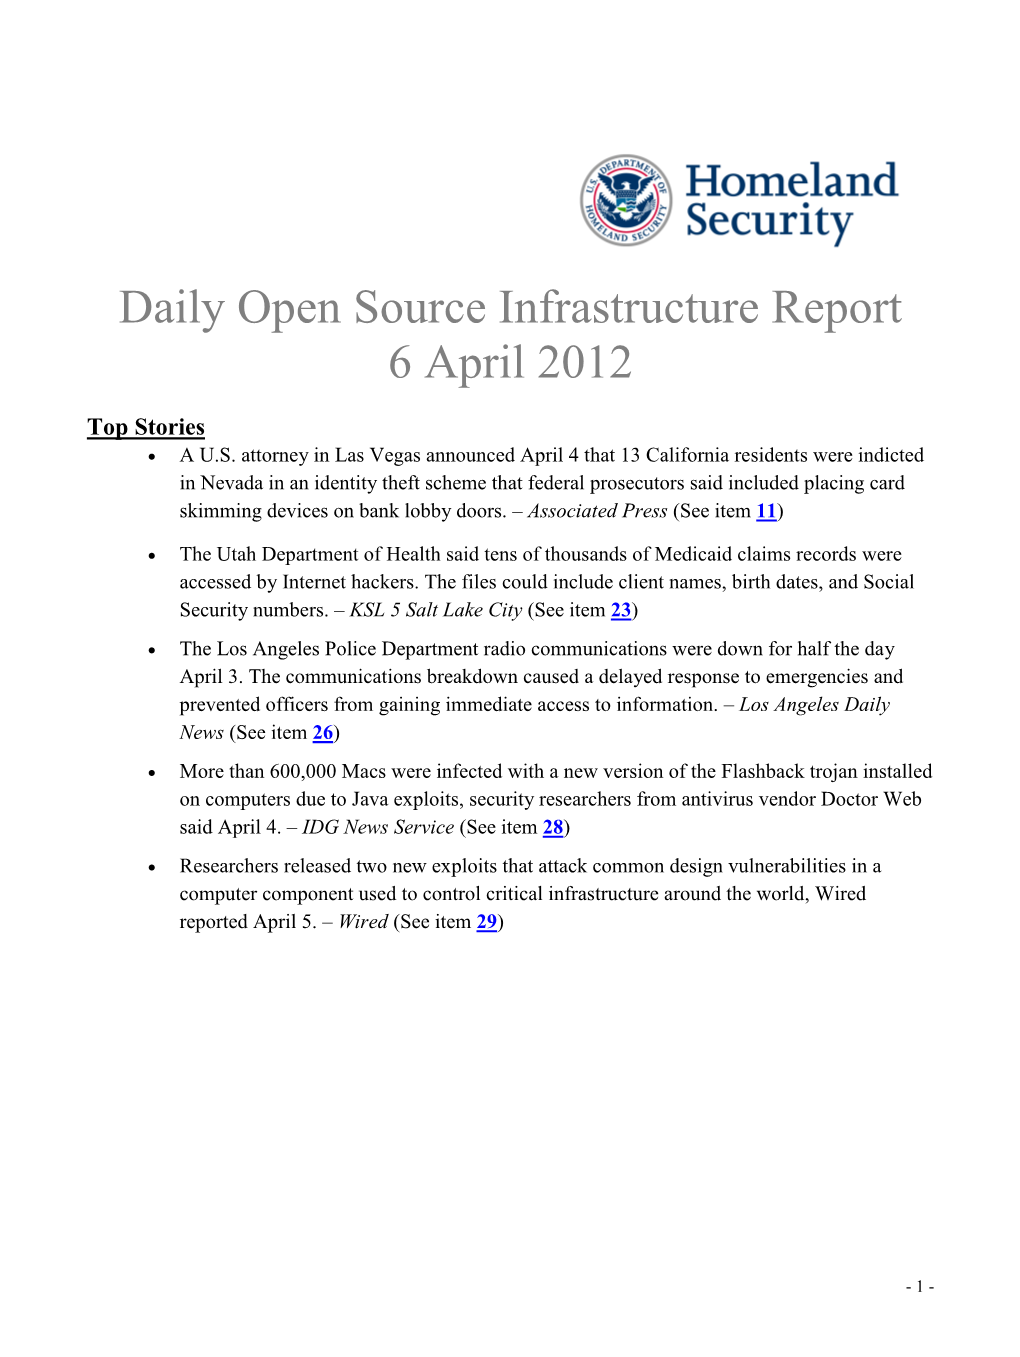 Daily Open Source Infrastructure Report 6 April 2012